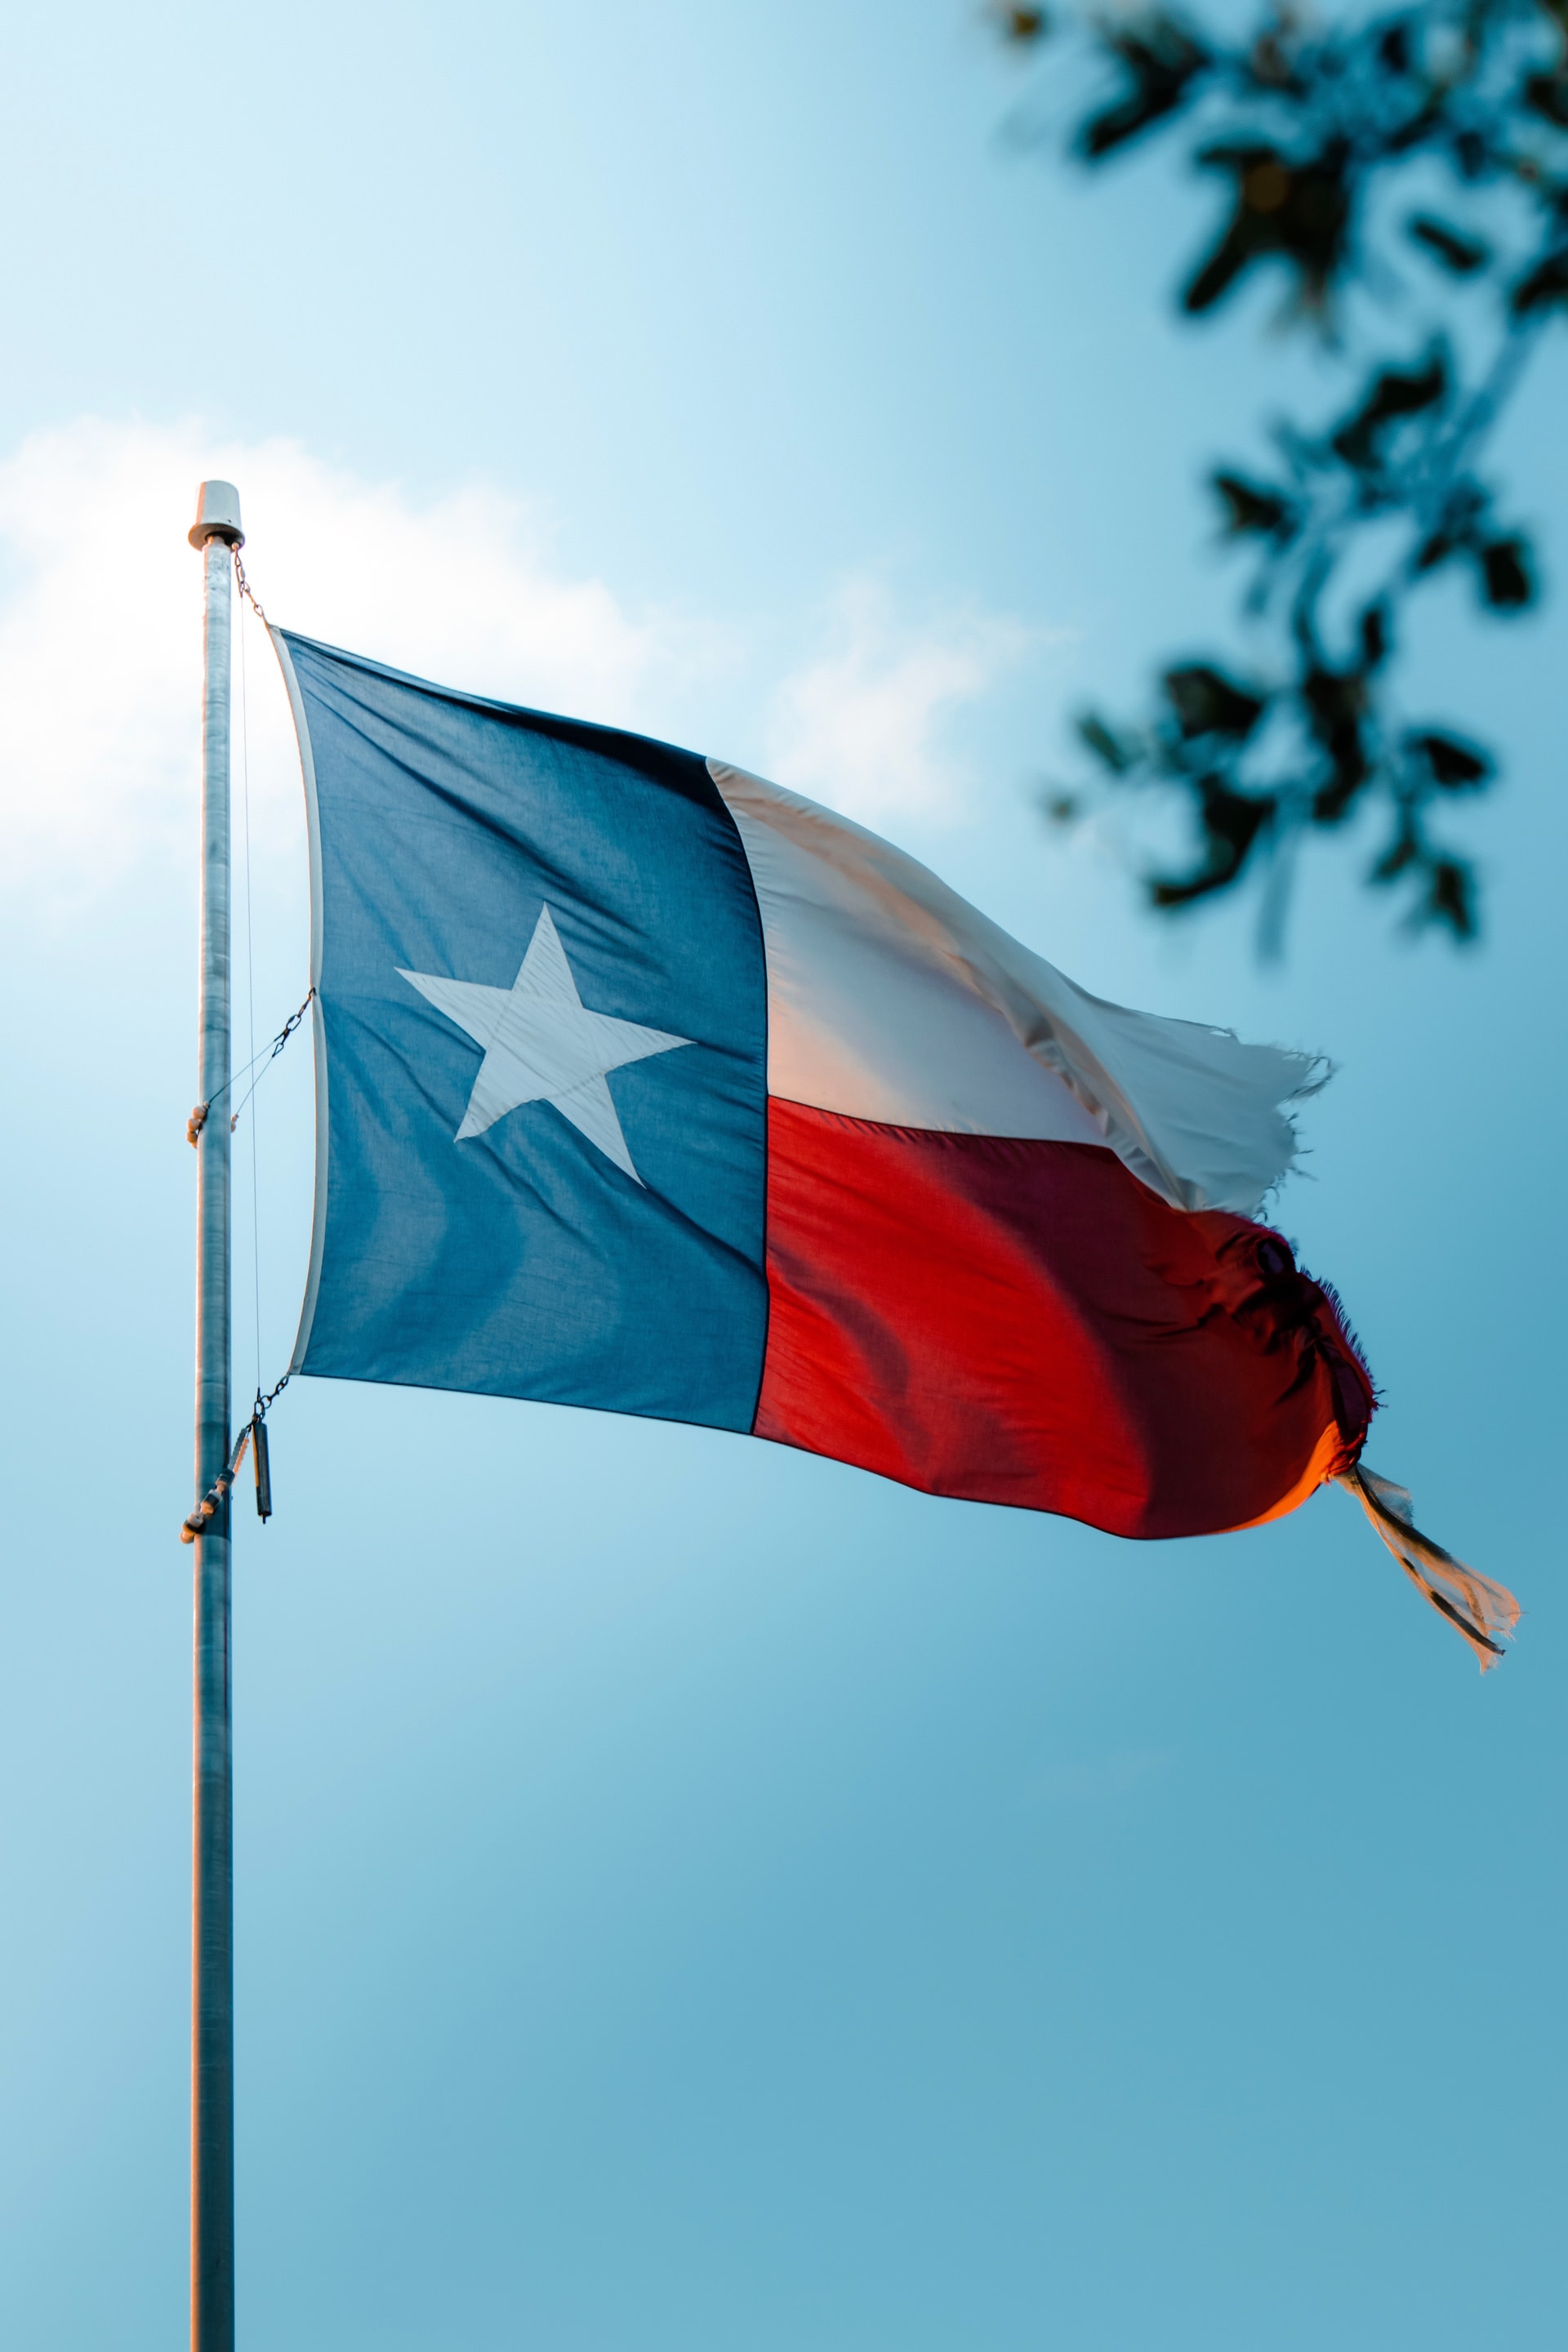 #10 Things to Expect When Moving to Texas